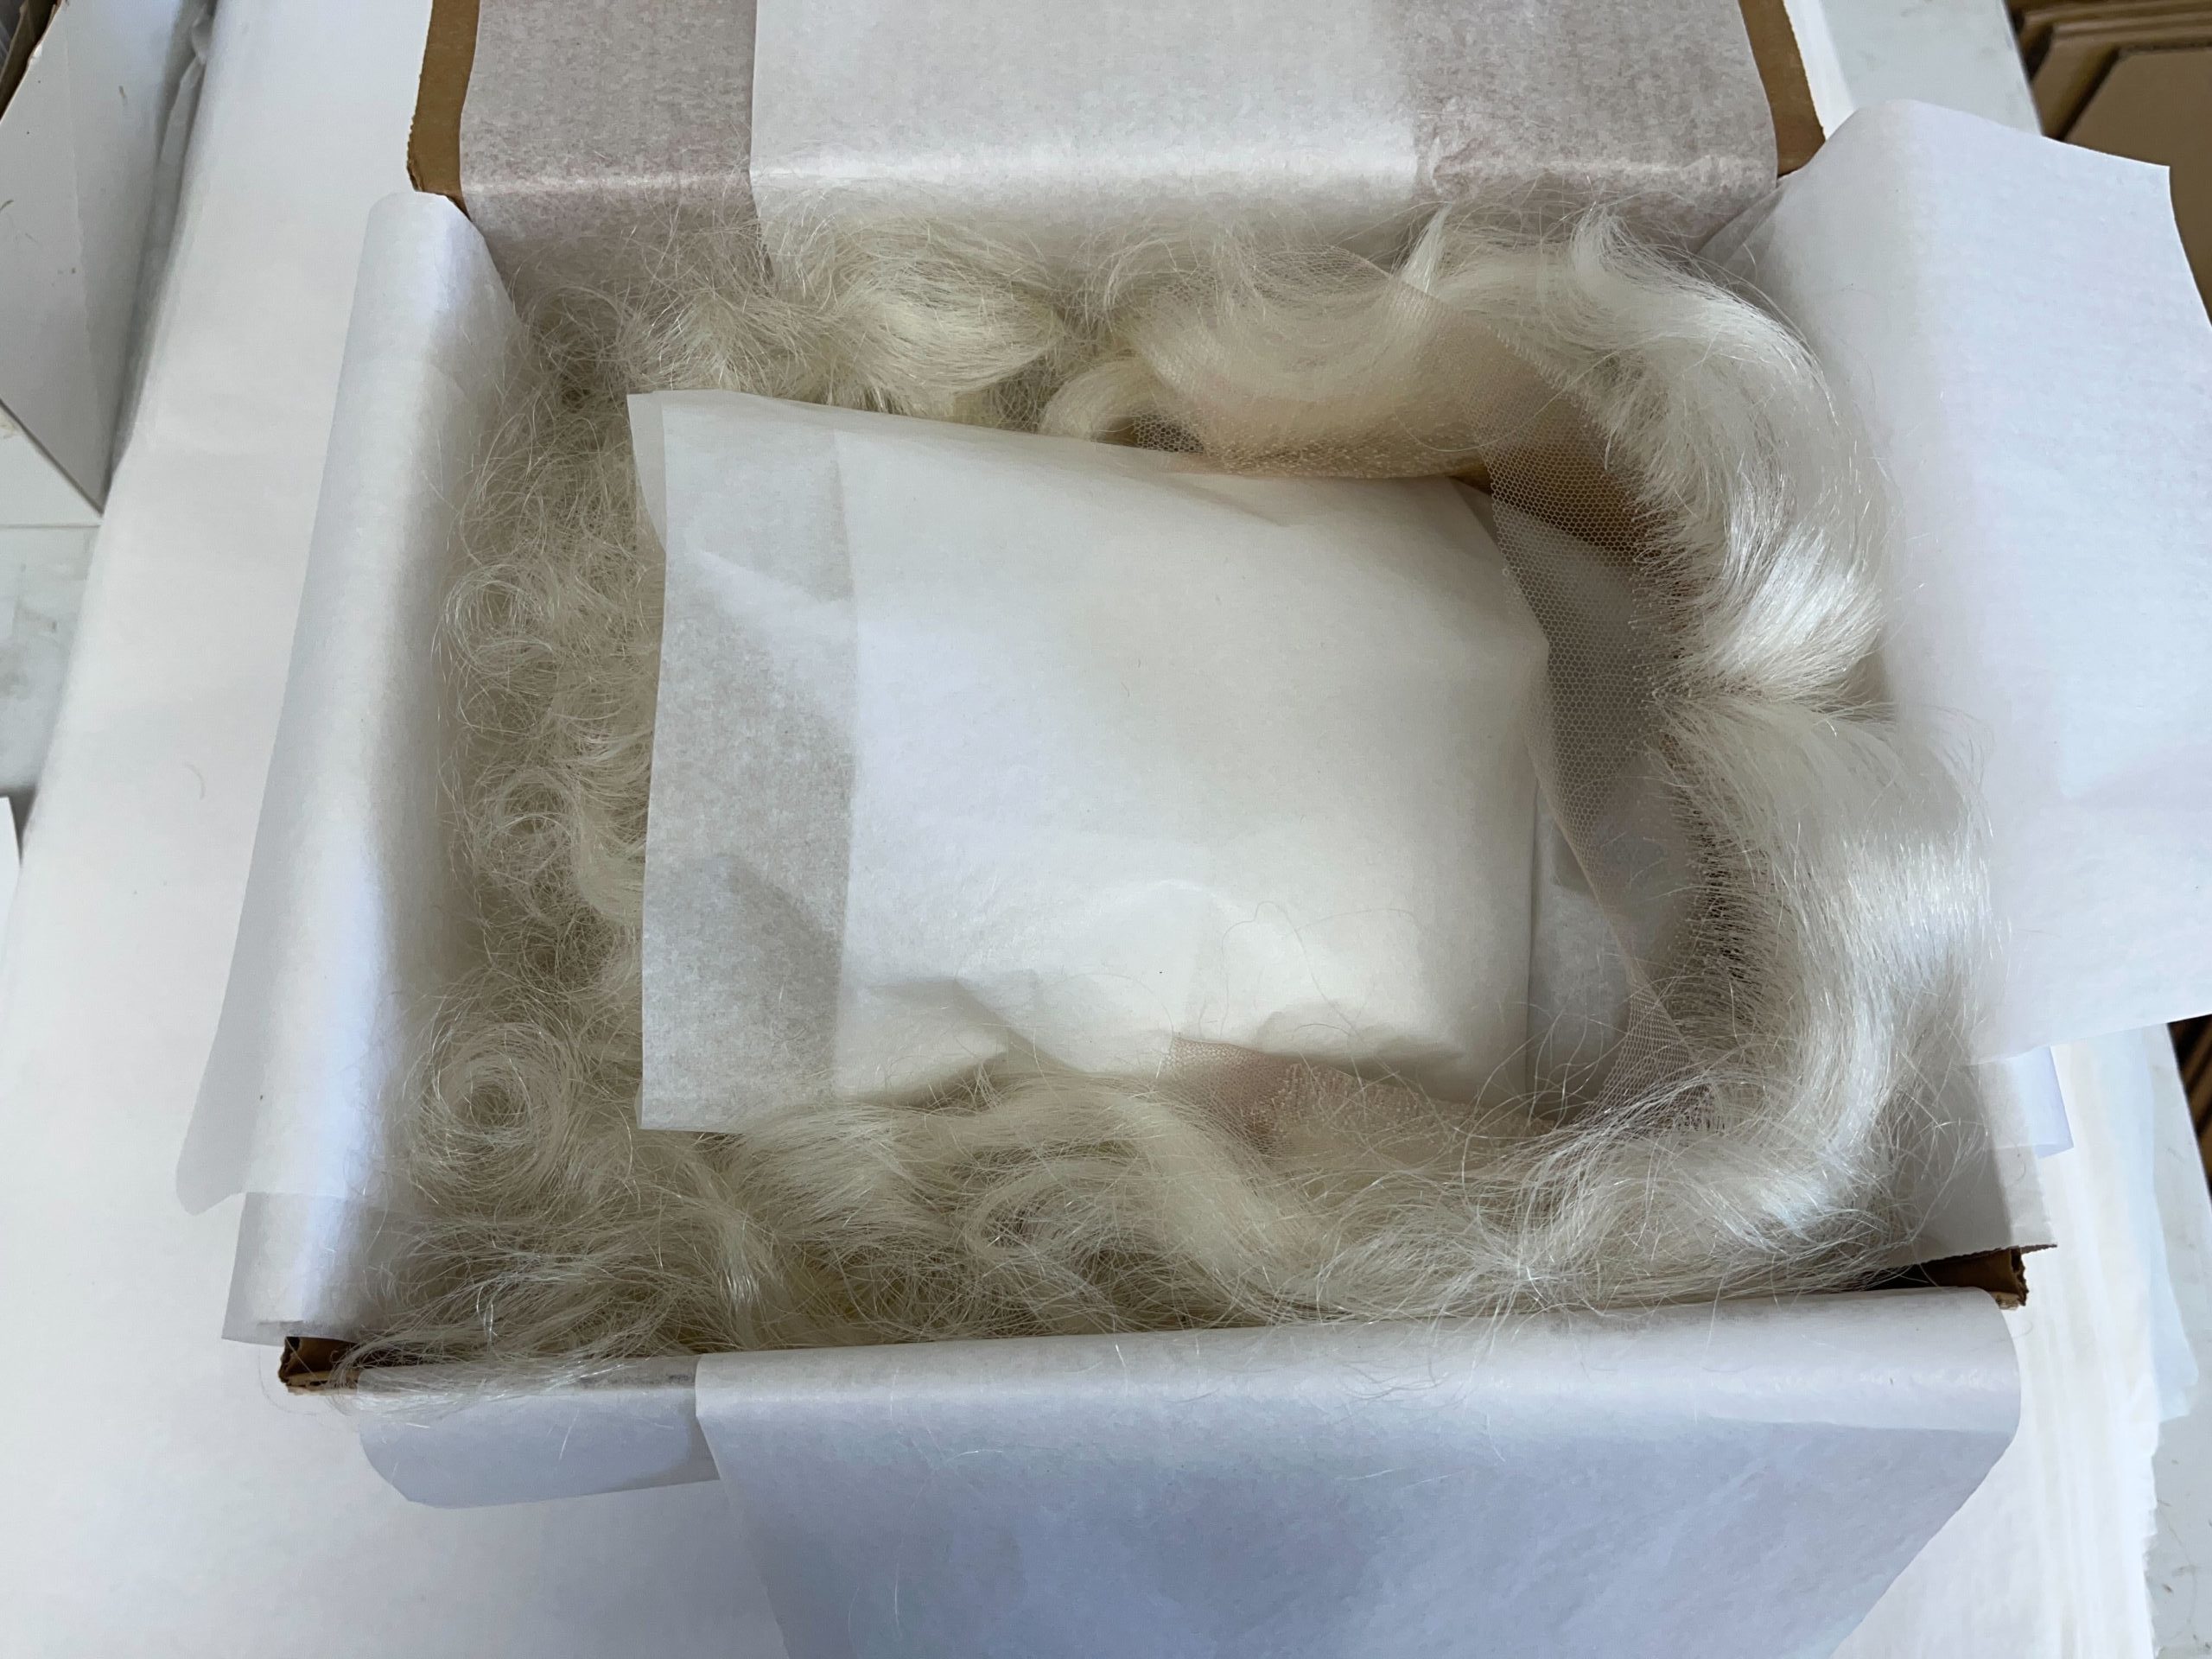 wig and beard packed for travel or shipment